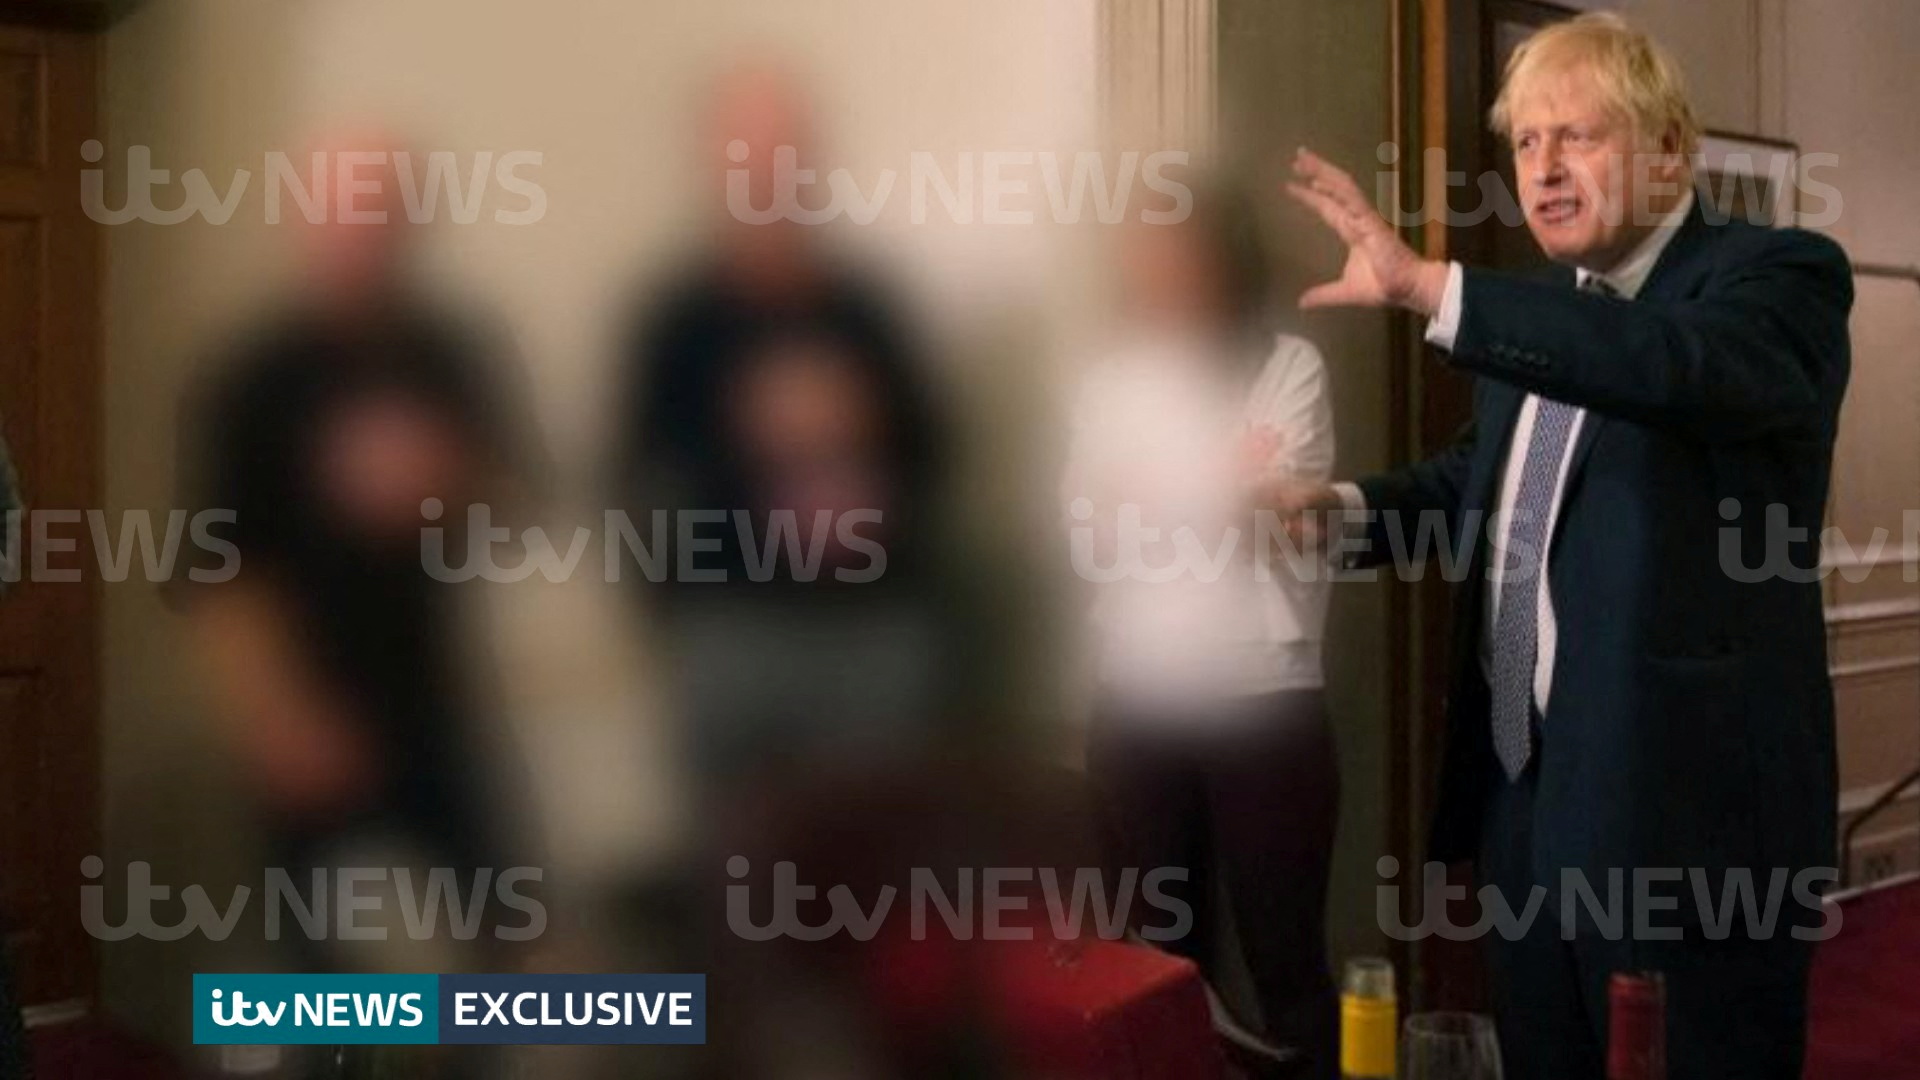 A handout picture shows British Prime Minister Boris Johnson gesturing during a party at Downing Street, amid the coronavirus disease (COVID-19) pandemic in London